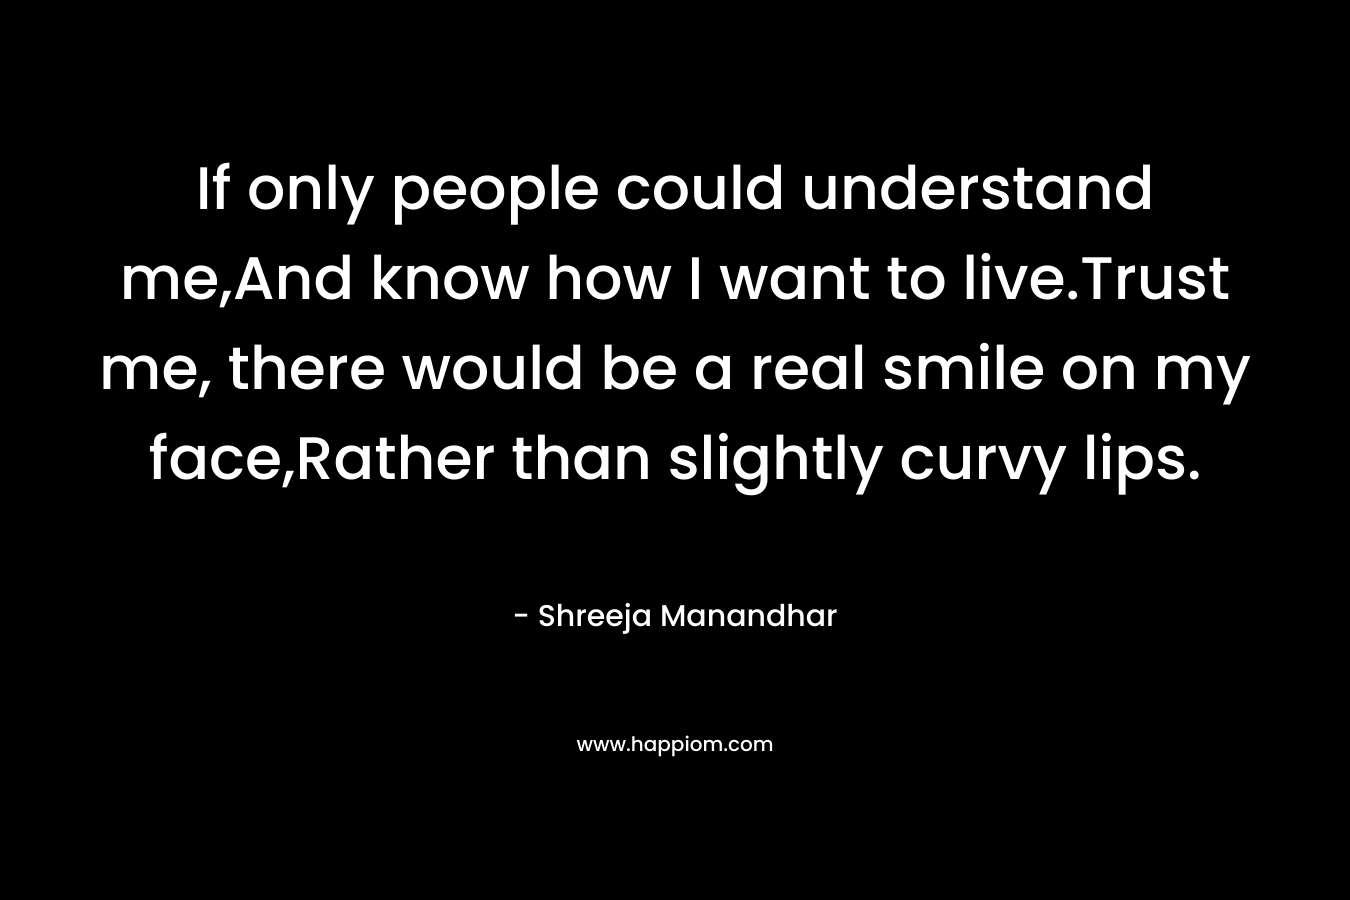 If only people could understand me,And know how I want to live.Trust me, there would be a real smile on my face,Rather than slightly curvy lips. – Shreeja Manandhar